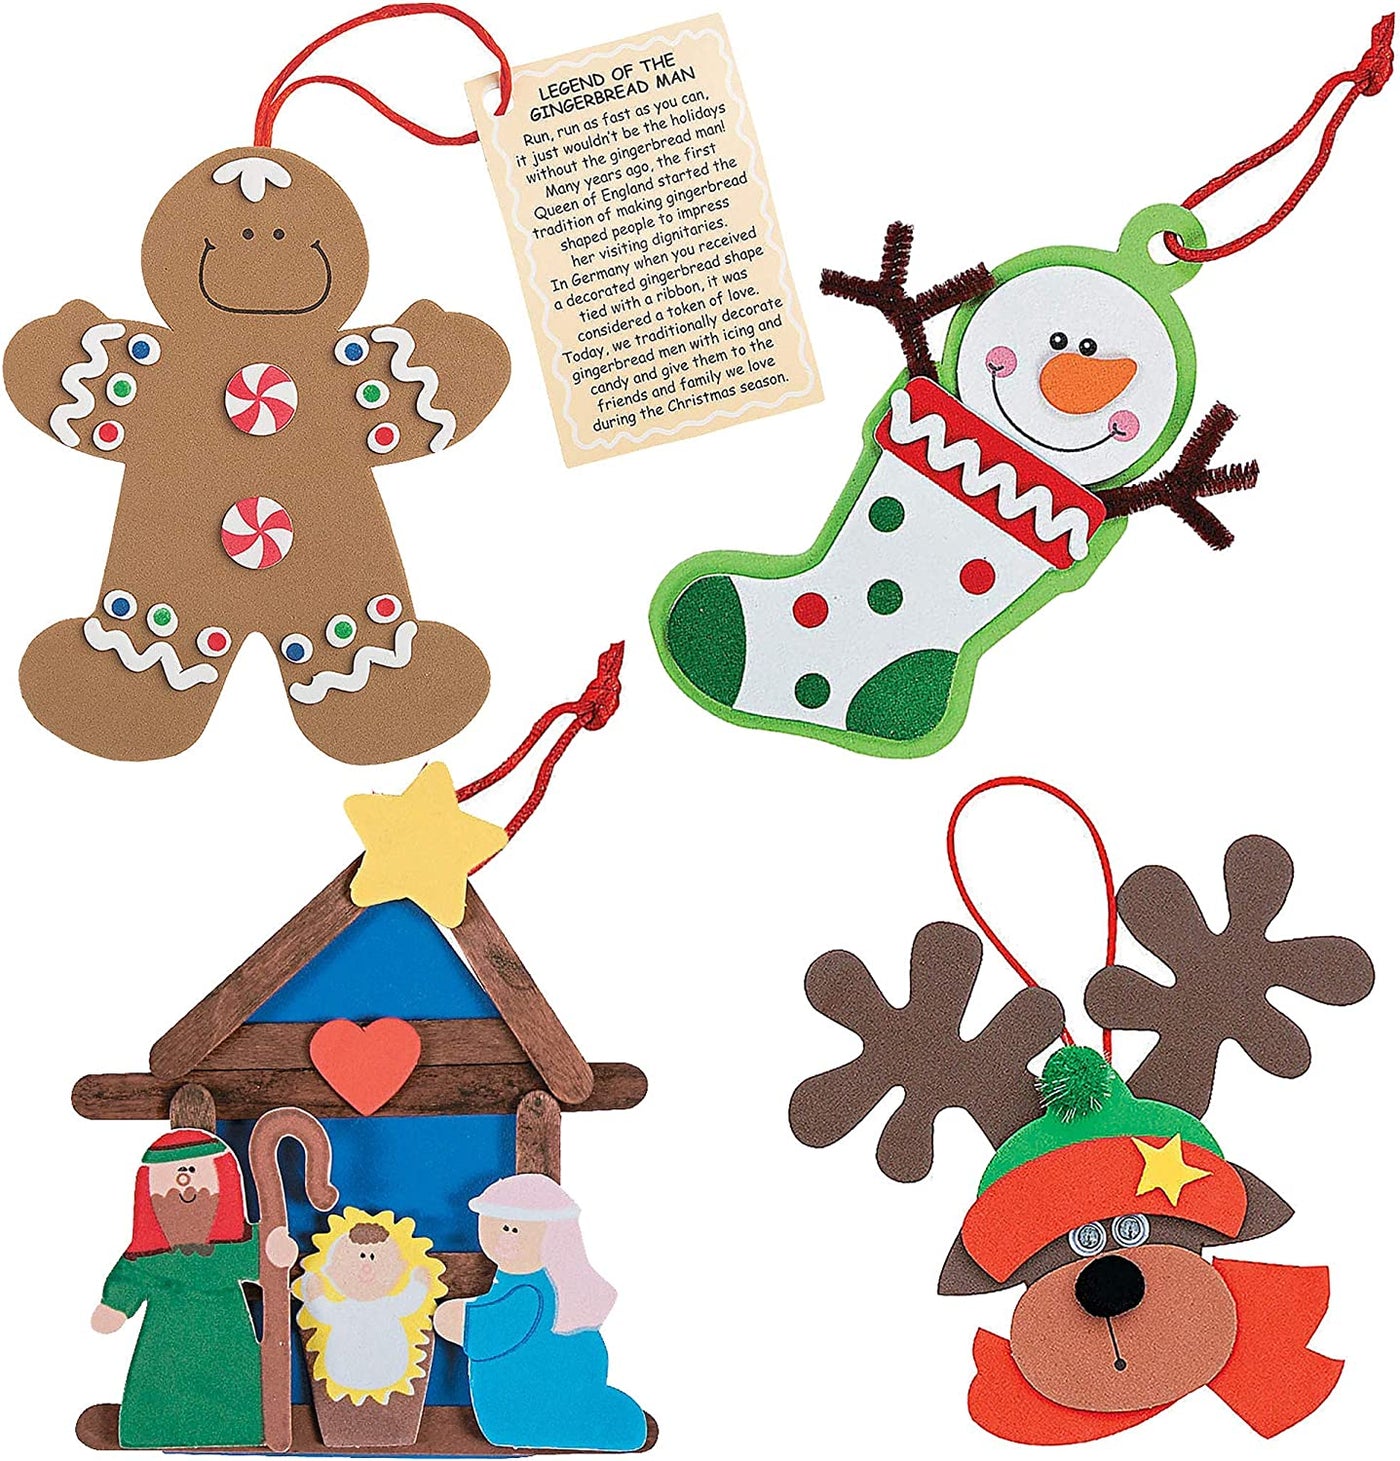 4E's Novelty Christmas Ornament Crafts for Kids (Set of 4) Gingerbread Man, Stocking, Reindeer, Nativity, Christmas Crafts for Kids & Toddlers Ages 3-12, DIY Winter Activity, Stocking Stuffers